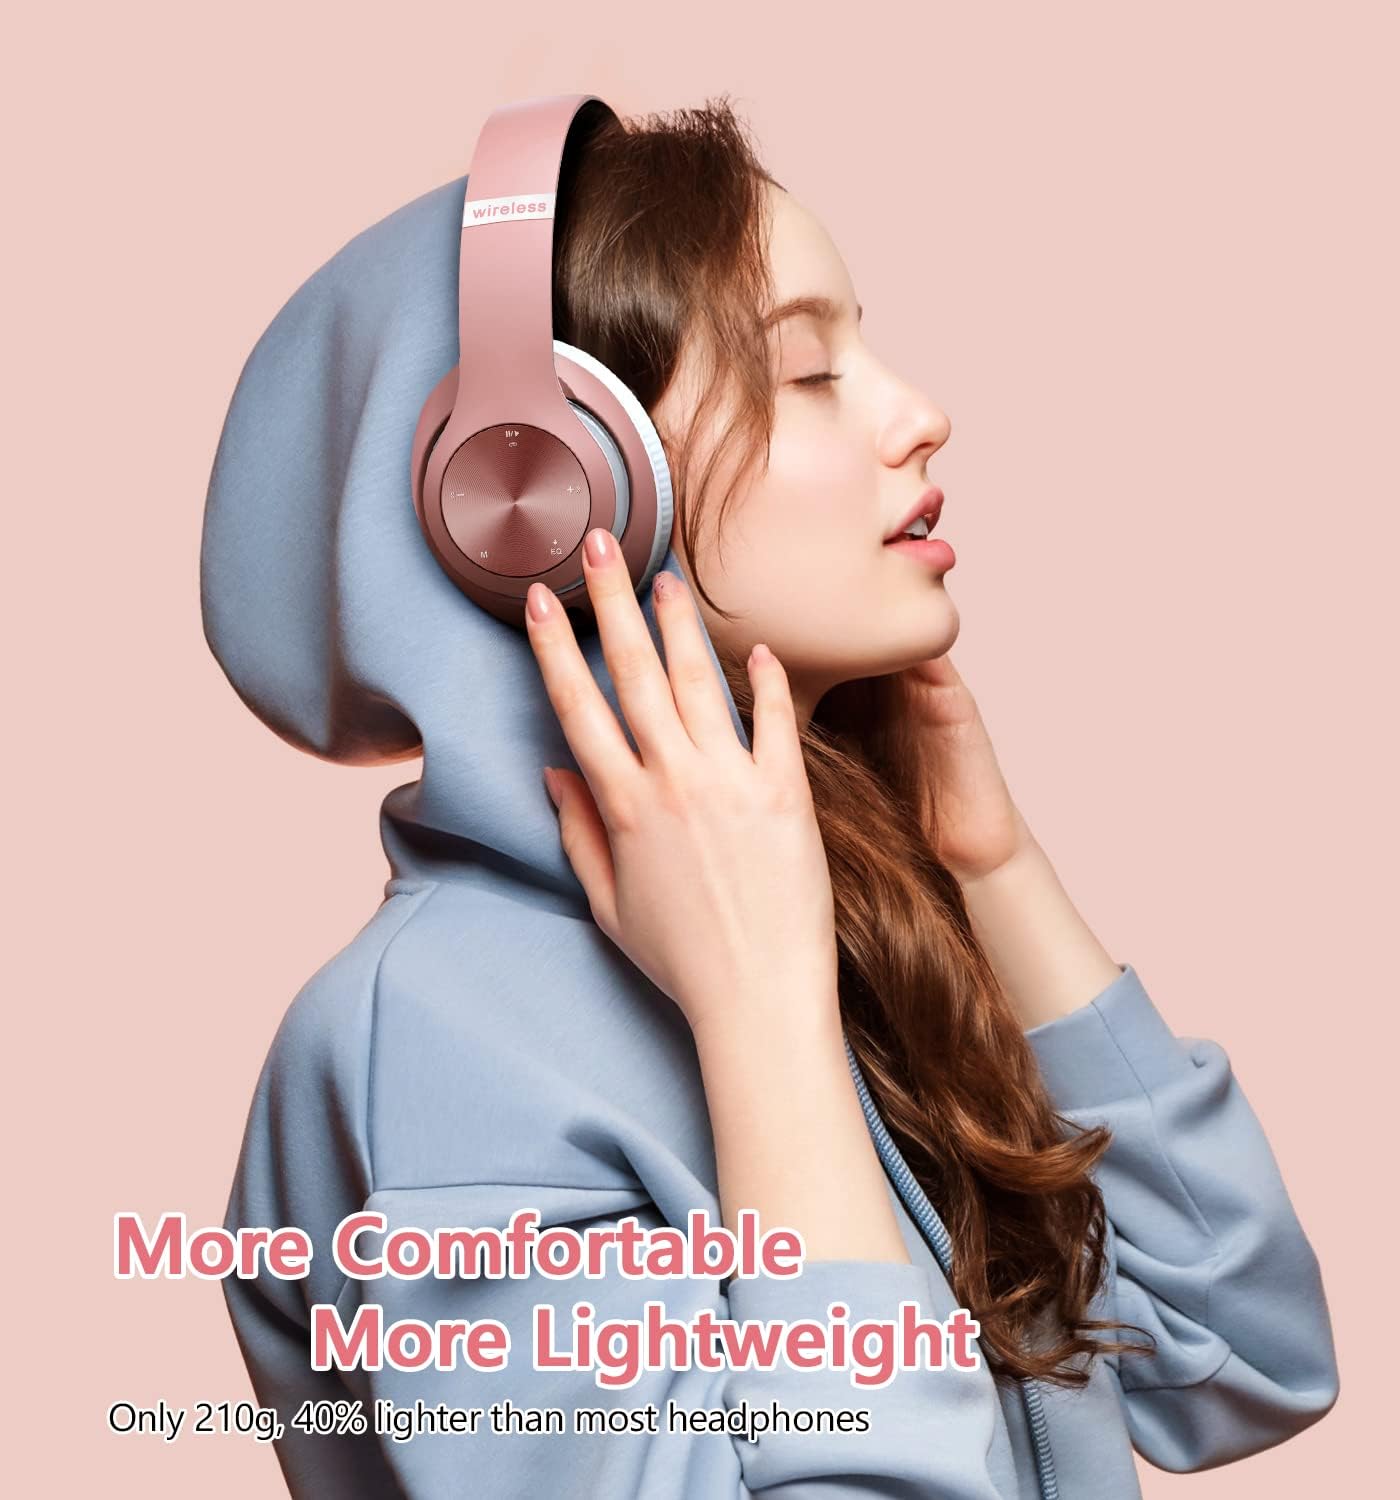 Bluetooth Headphones Over-Ear, 60 Hours Playtime Foldable Lightweight Wireless Headphones Hi-Fi Stereo On-Ear with 6 EQ Modes, Bass Adjustable Headset with Microphone, FM, SD/TF for Phone/PC/TV/Home